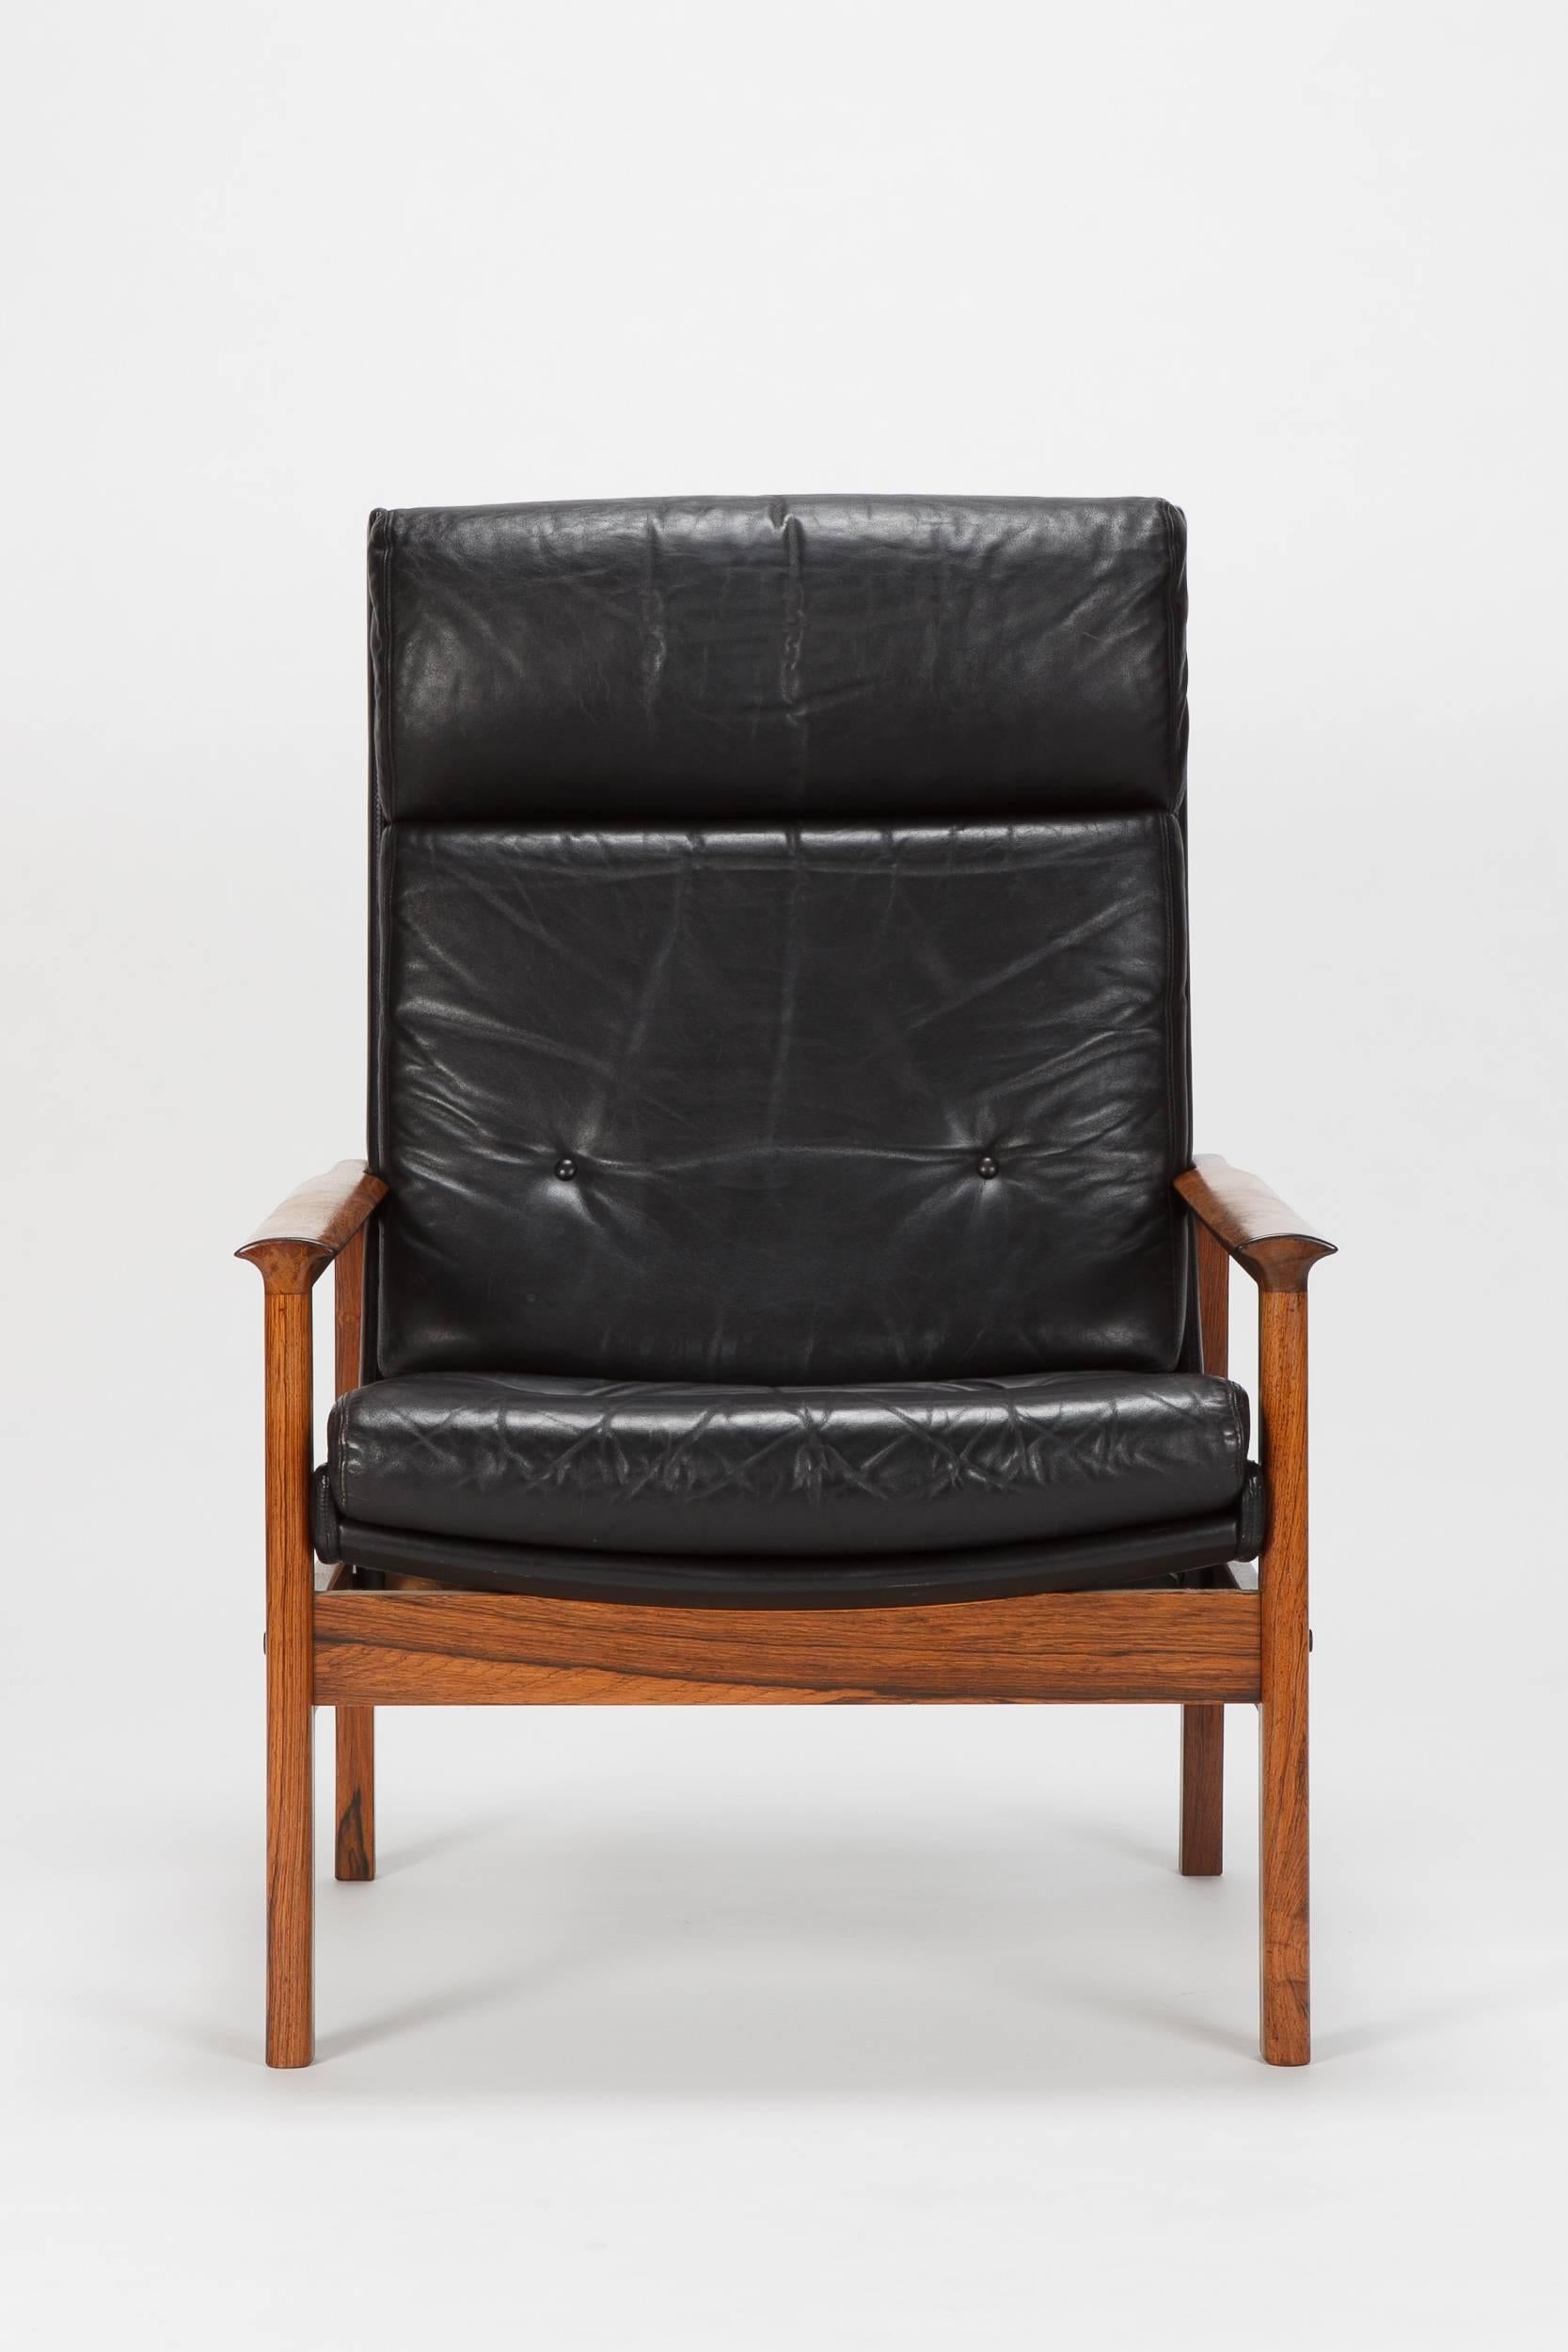 Beautiful rosewood high back lounge chair attributed to Frederik Kayser and manufactured in the late 1960s-early 1970s. Frame made of solid rosewood, beautiful vintage patina. Seat and back in gorgeous black leather. In a leather frame lined